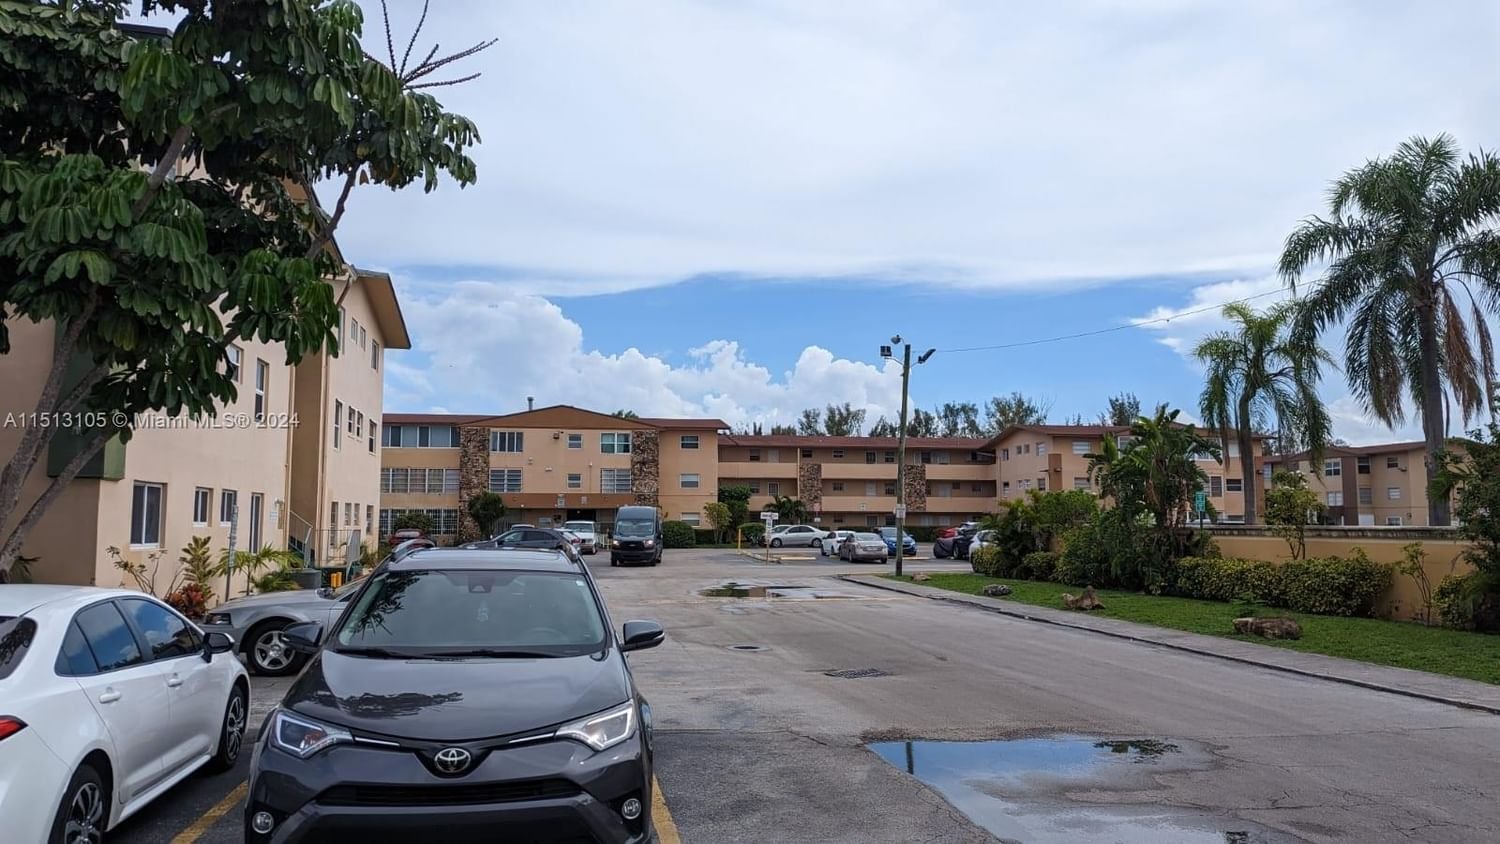 Real estate property located at 110 Royal Palm Rd #305, Miami-Dade County, PALM SPRINGS GARDENS BLDG, Hialeah Gardens, FL